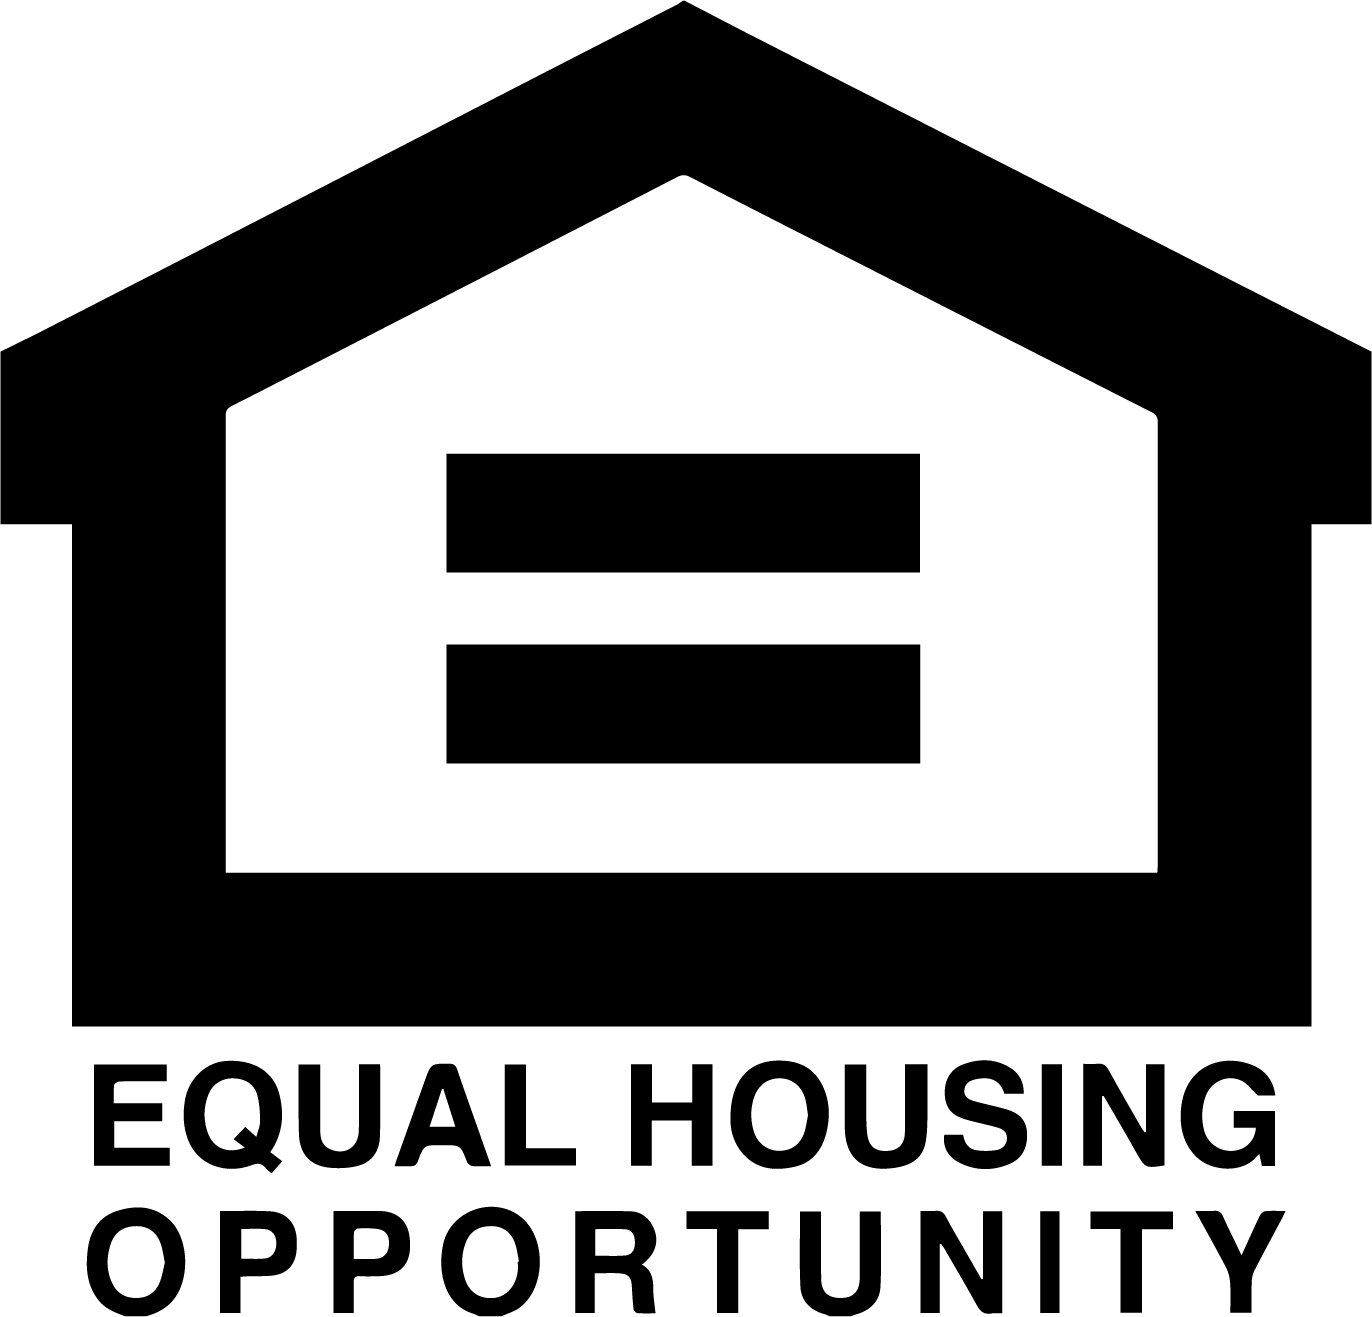 equal-housing-opportunity-logo